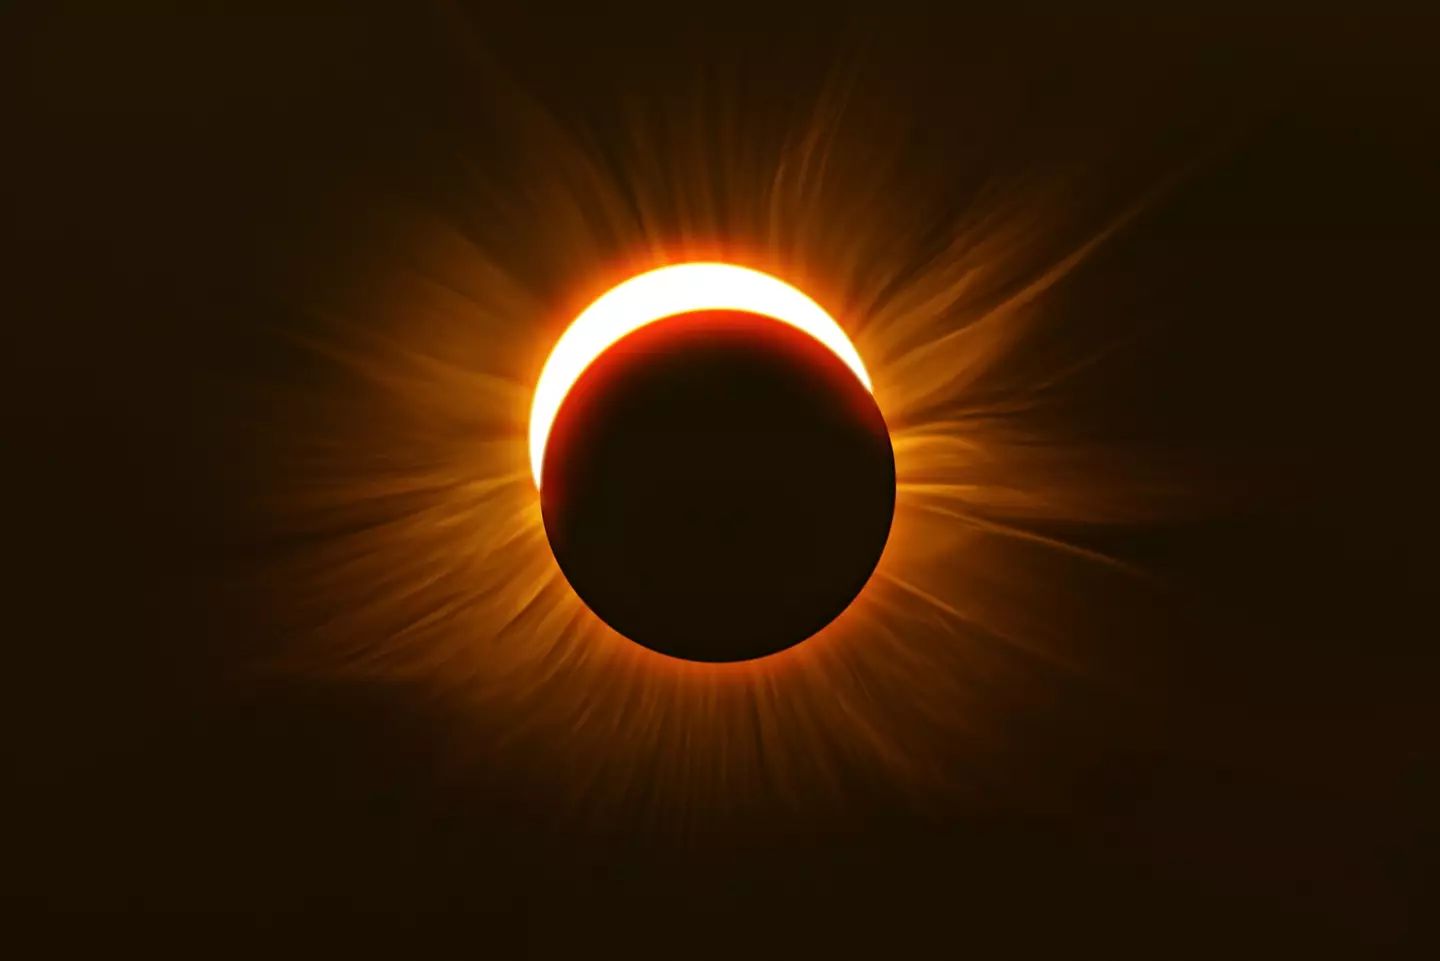 A solar eclipse is taking place today (8 April).